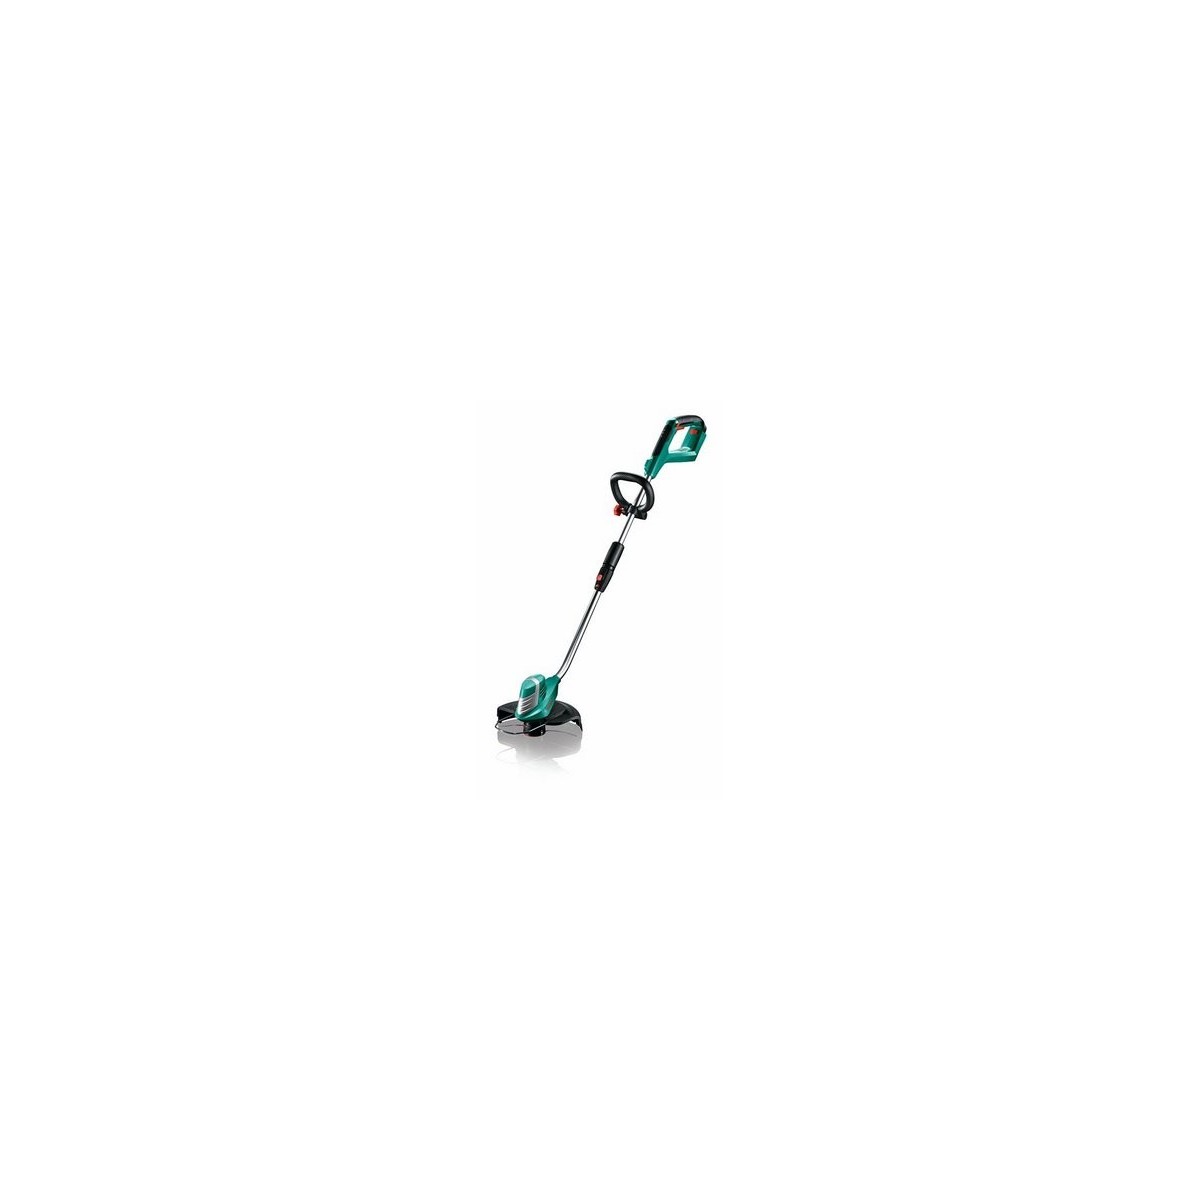 BOSCH  Cordless grass trimmer AdvancedGrassCut 36, 36V, SOLO, Without battery and charger 0600878N04